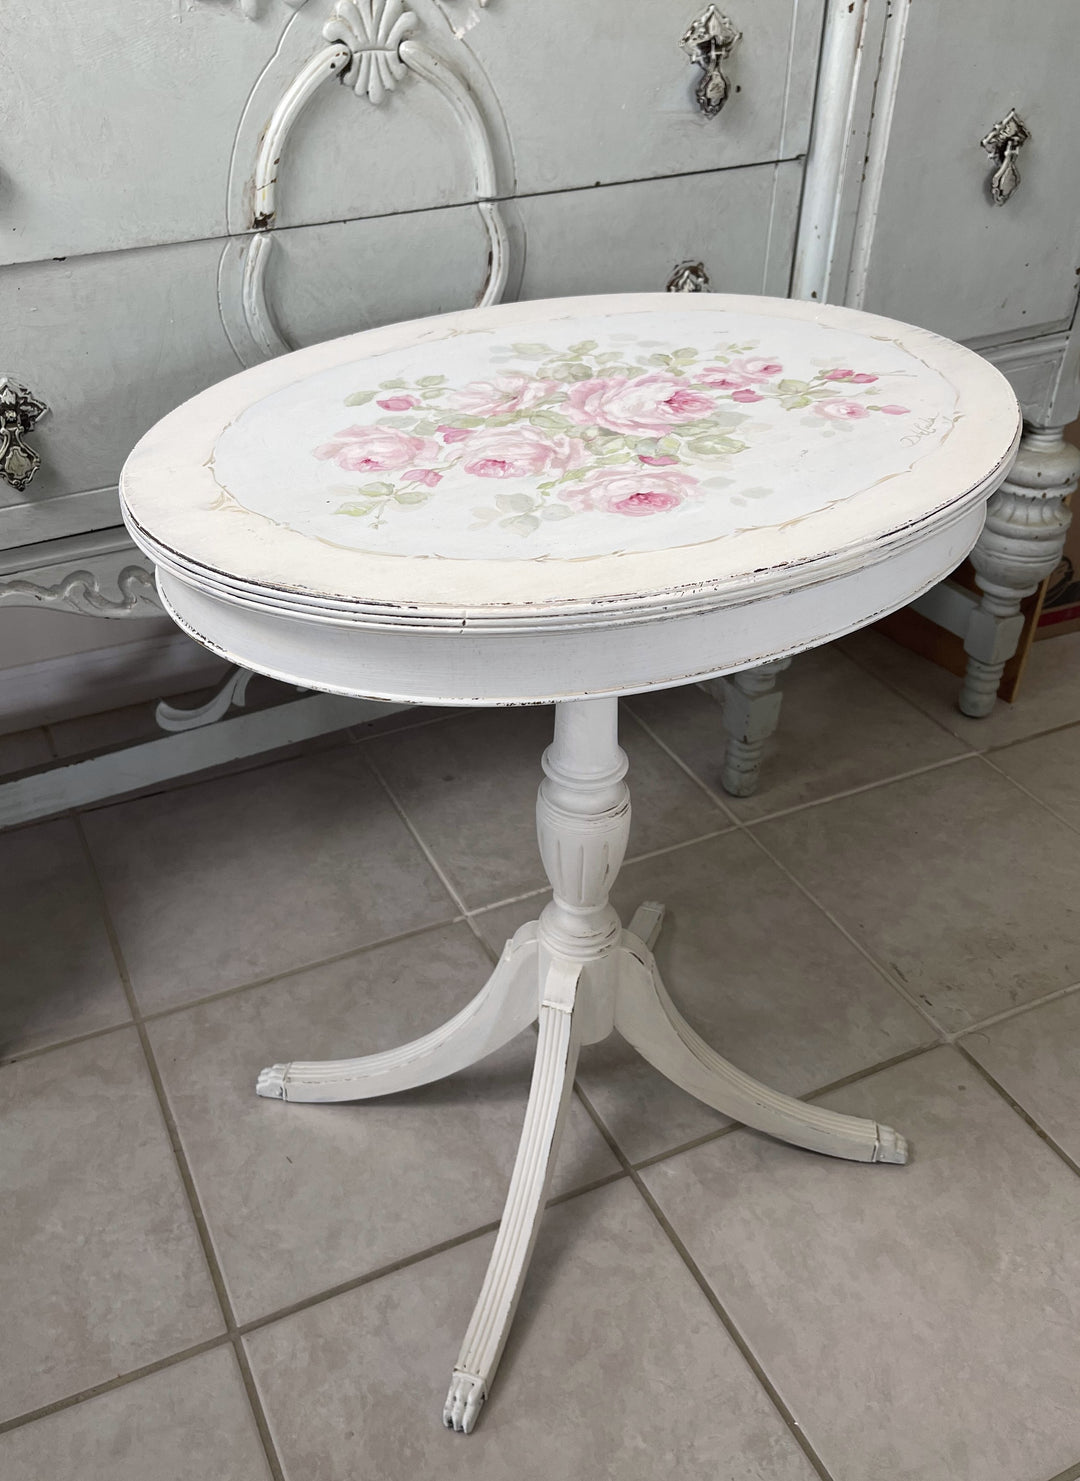 Shabby Chic Antique Hand Painted Roses Table Original  by Debi Coules